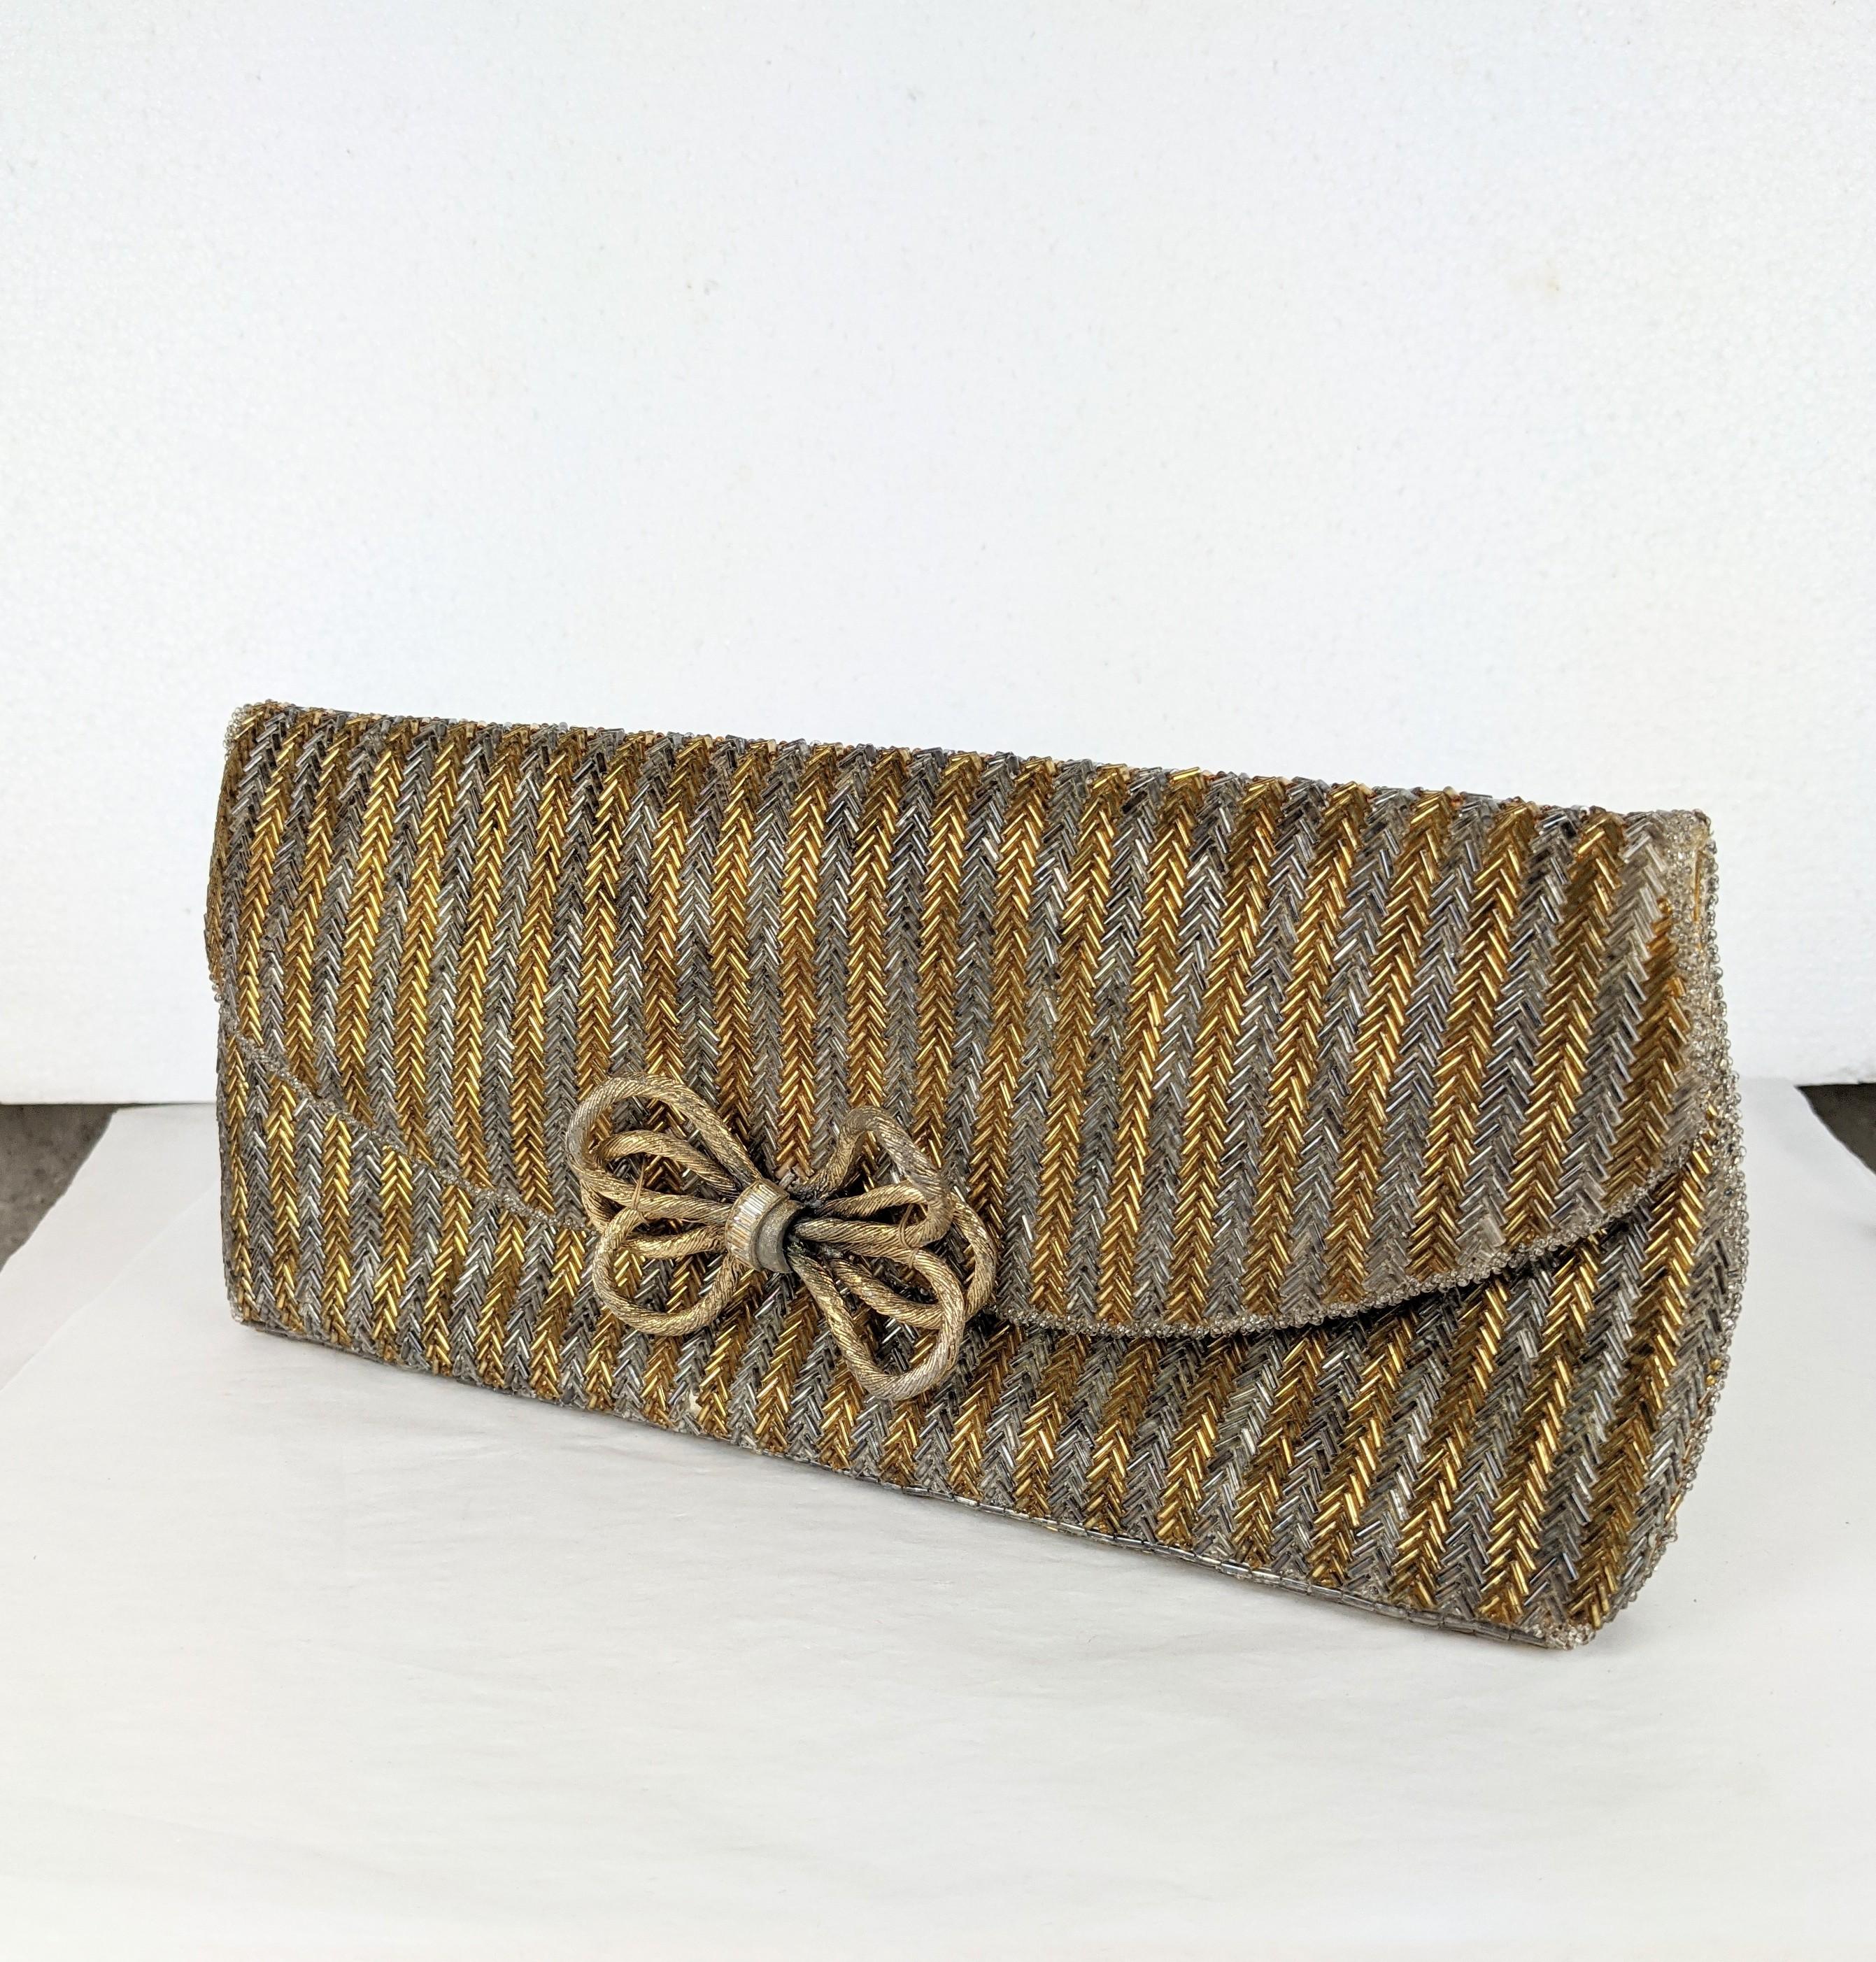 Jacomo Paris Chevron Beaded Clutch In Good Condition For Sale In New York, NY